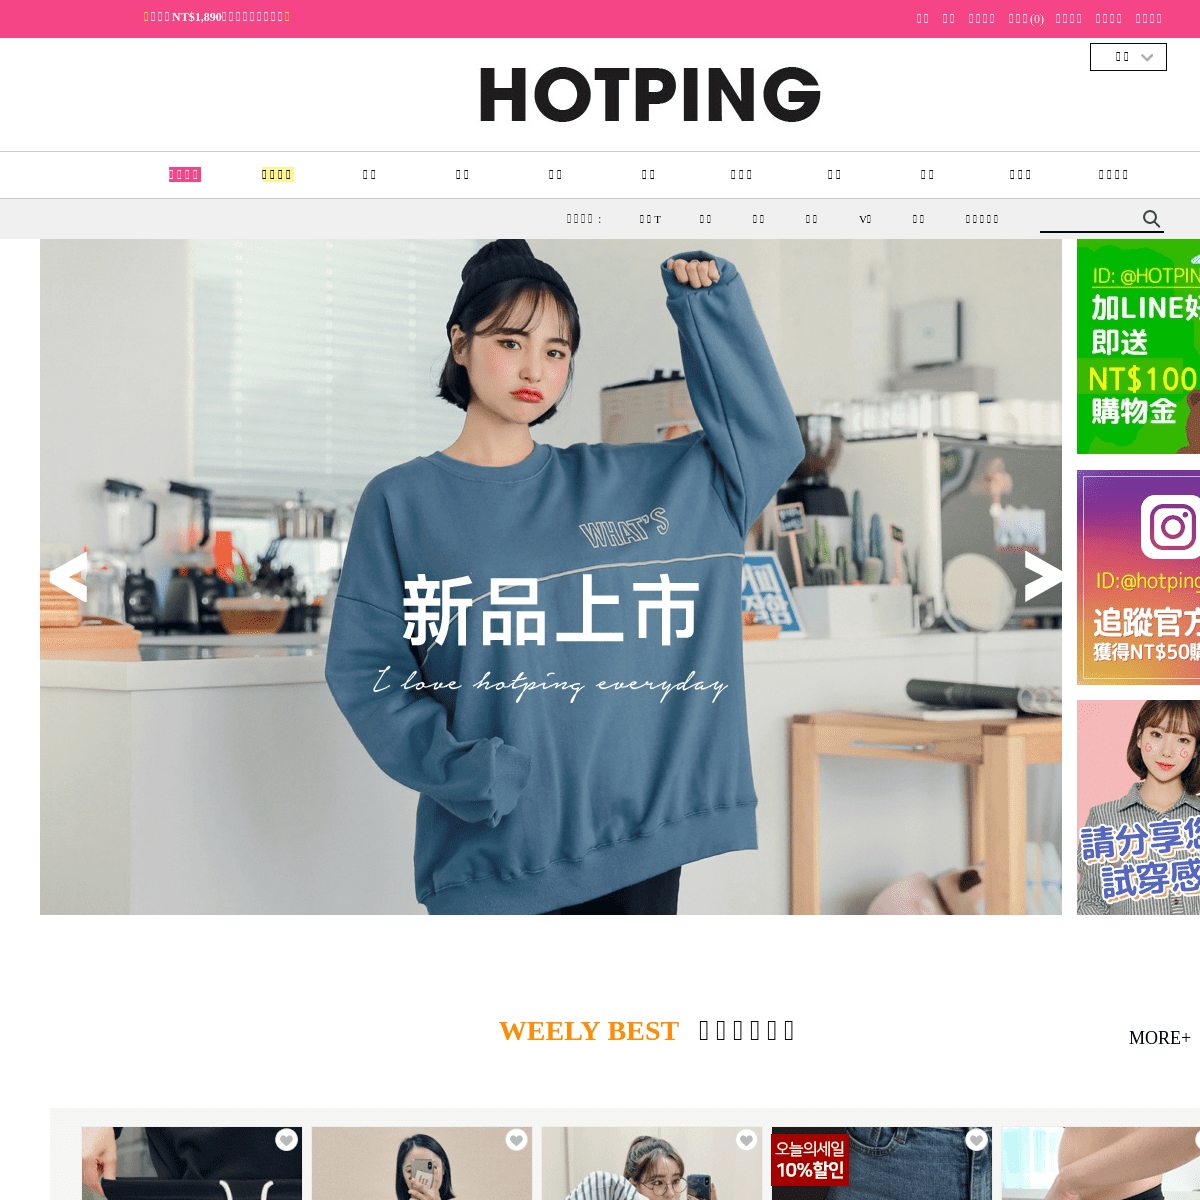 A complete backup of hotping.com.tw